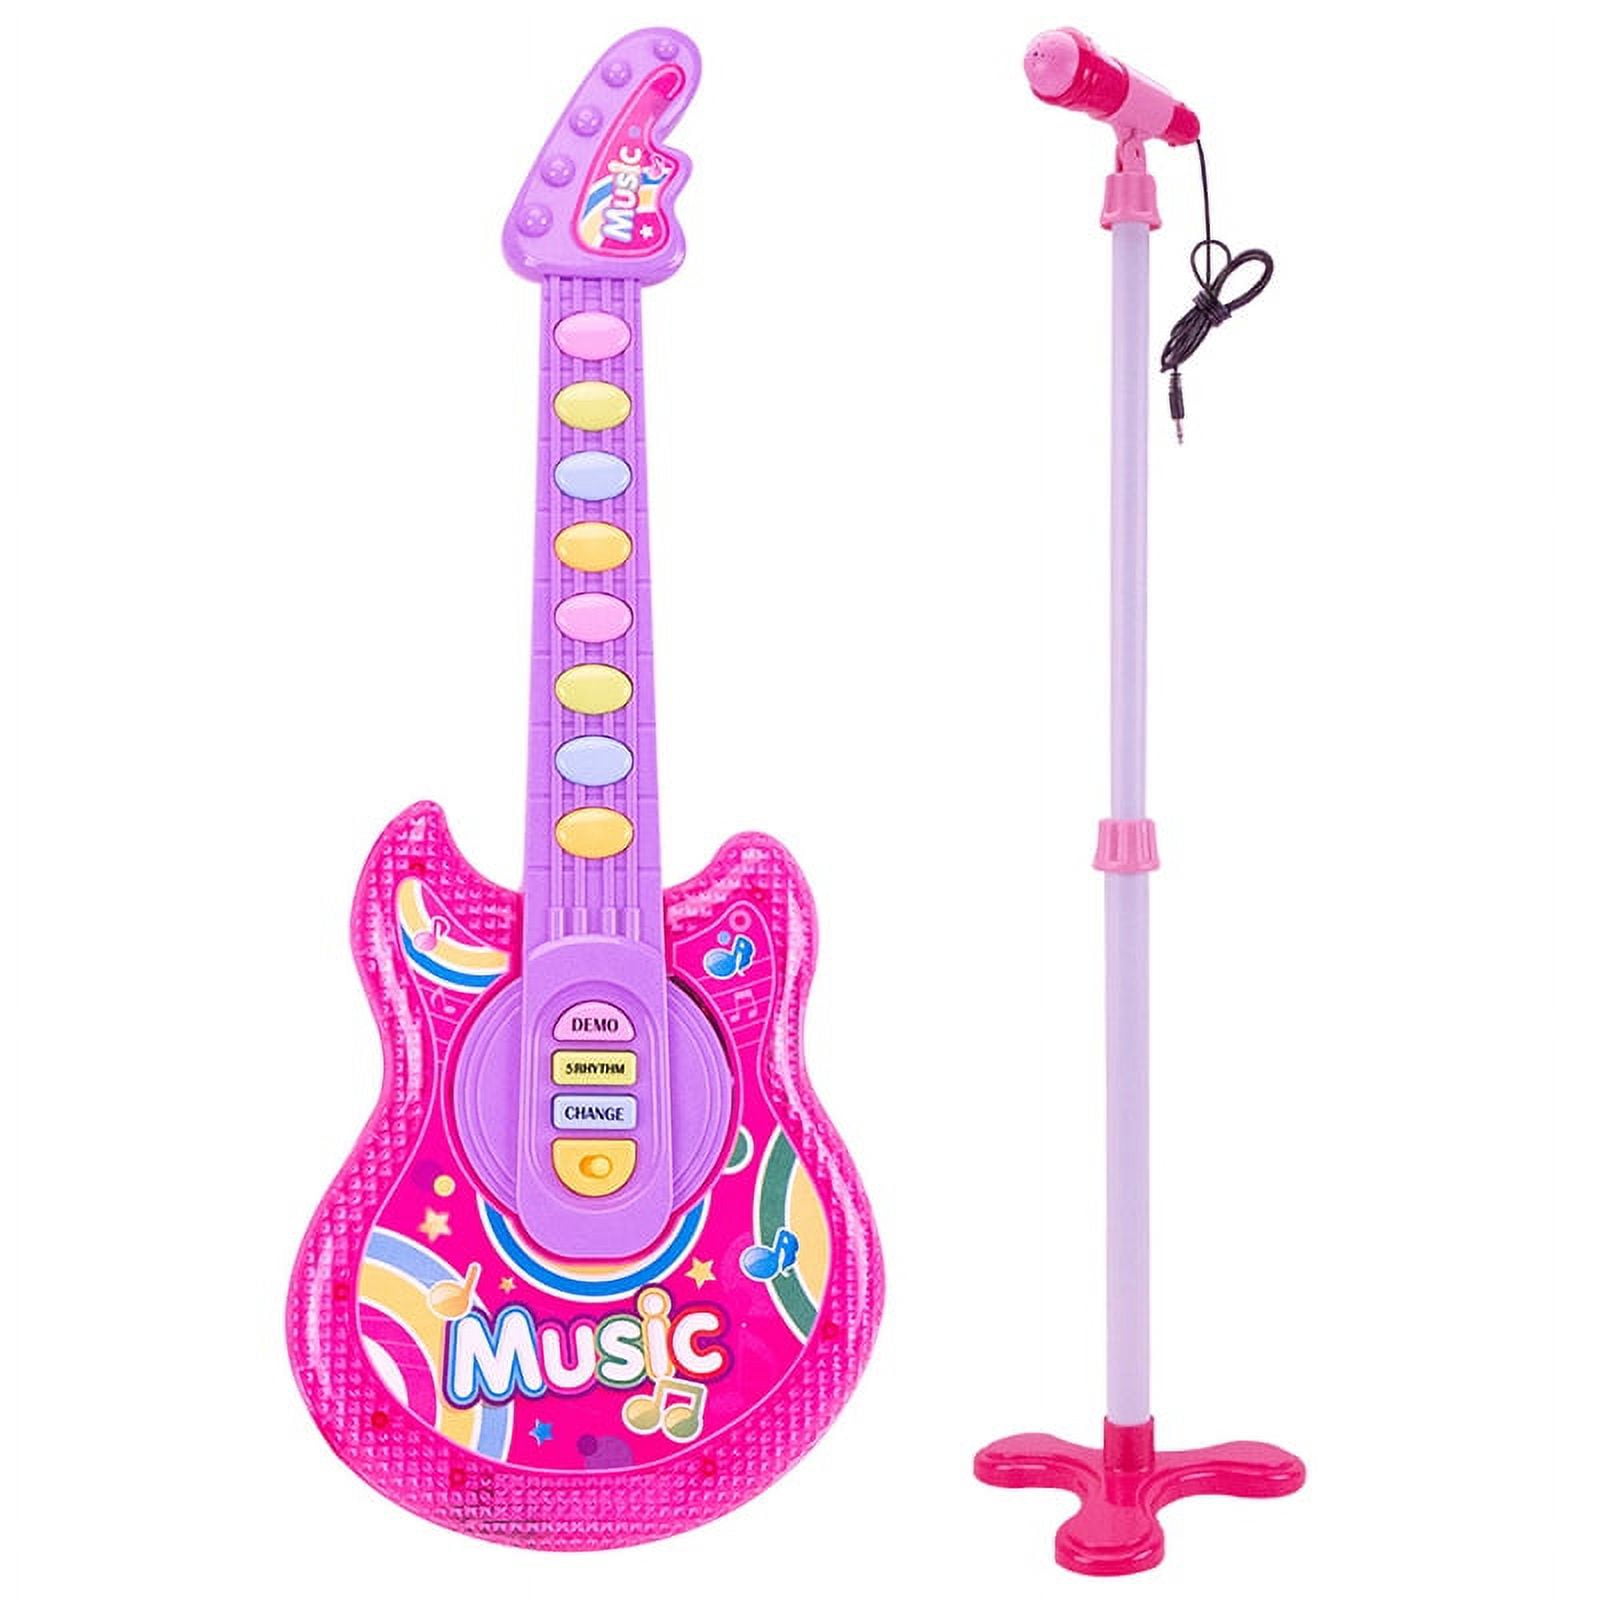 Clearance Kids Electric Musical Guitar Toy Play Set w/ 12 Demo Songs ...